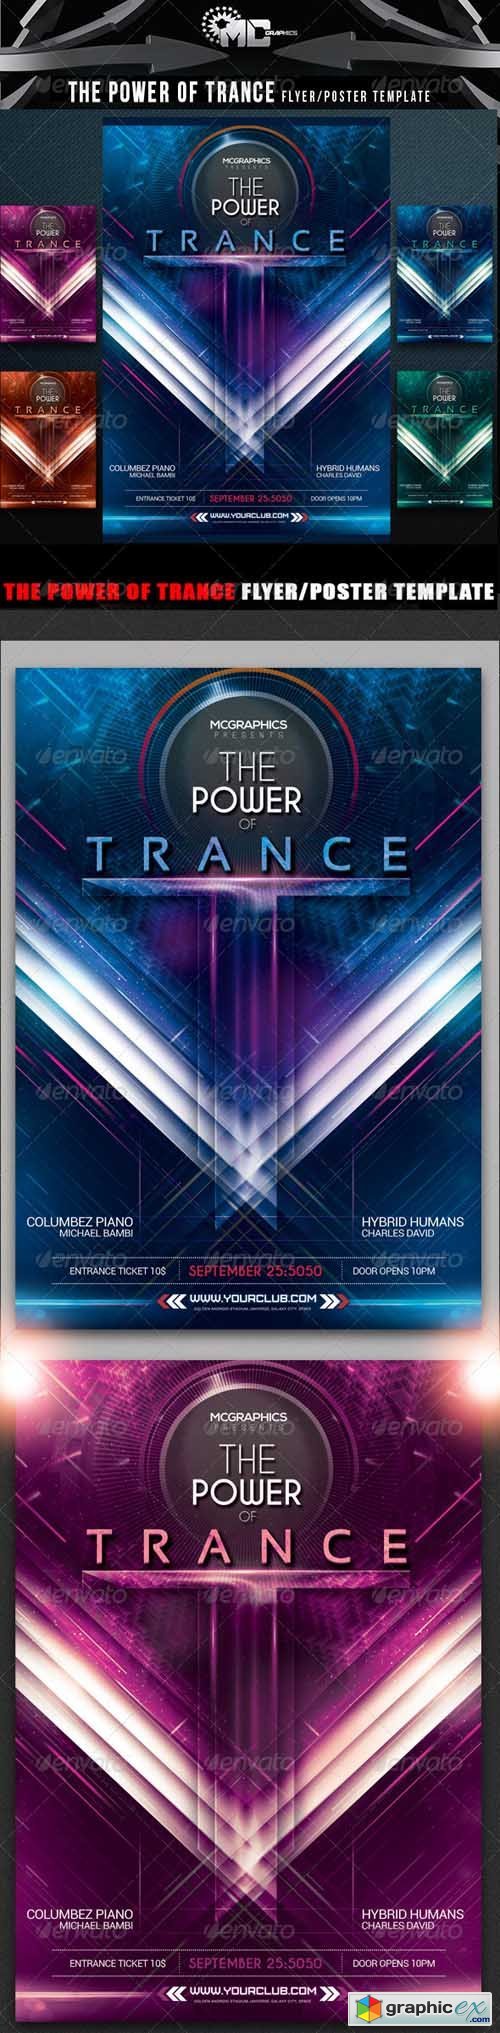 The Power of Trance Flyer/Poster Template